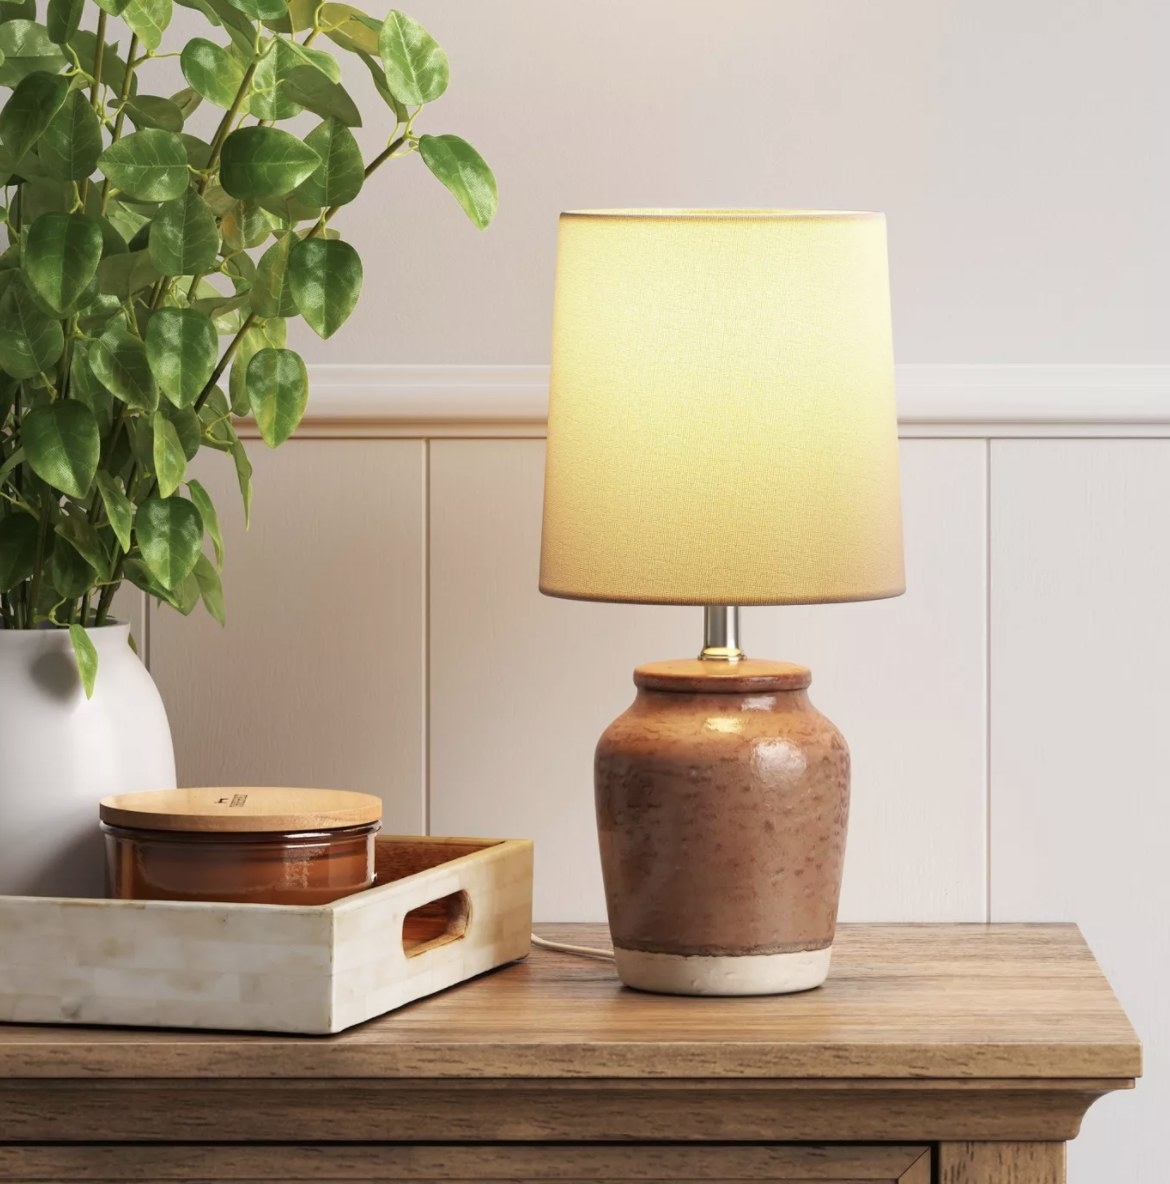 The lamp has a deep brown colored textured base with a small strip of neutral at the bottom and is turned on with a warm glow coming out of the drum shade